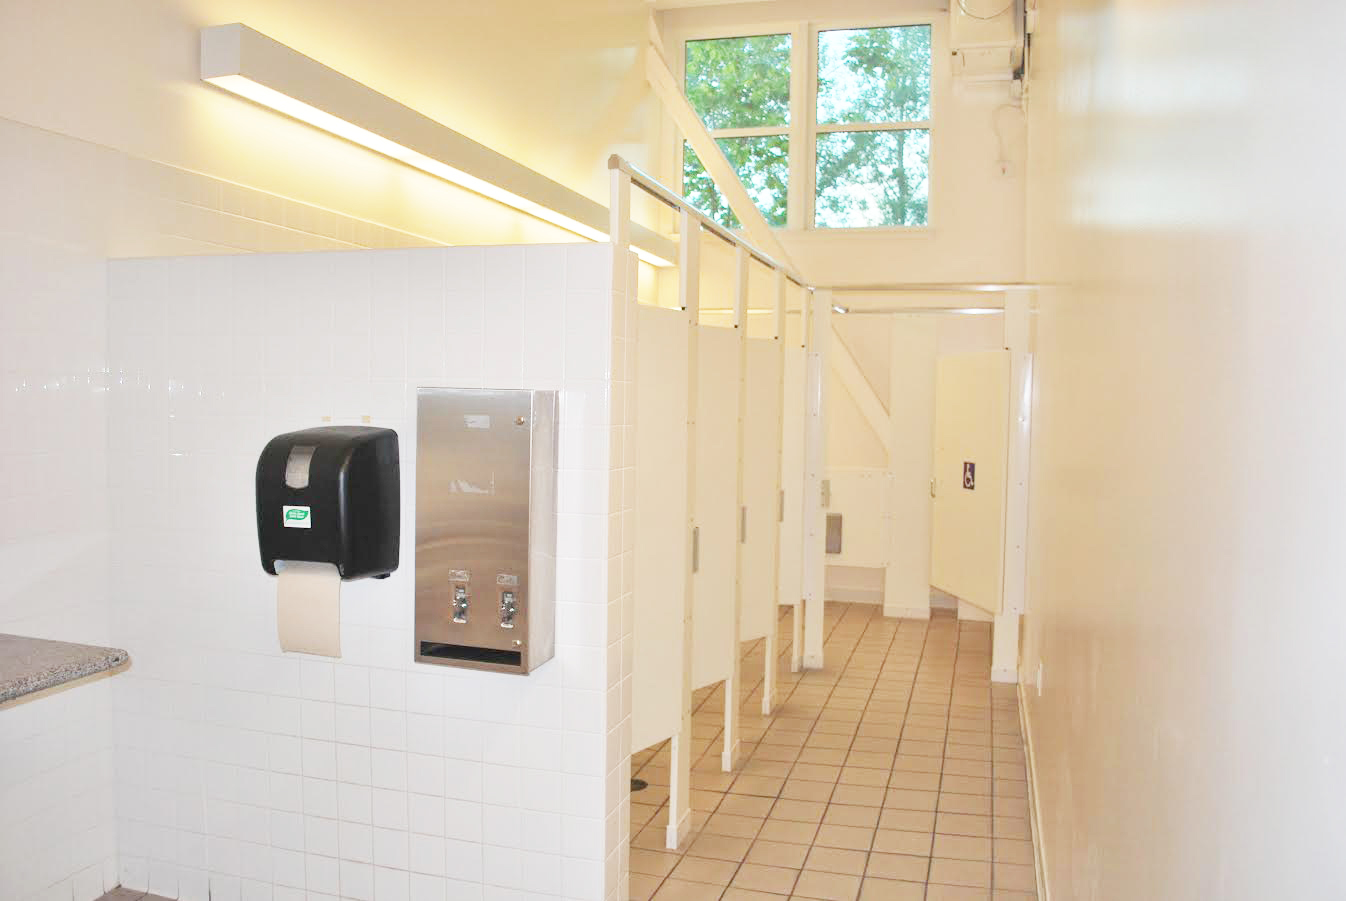 A porcelain match made in heaven or hell? Ranking the best and worst De Anza bathrooms